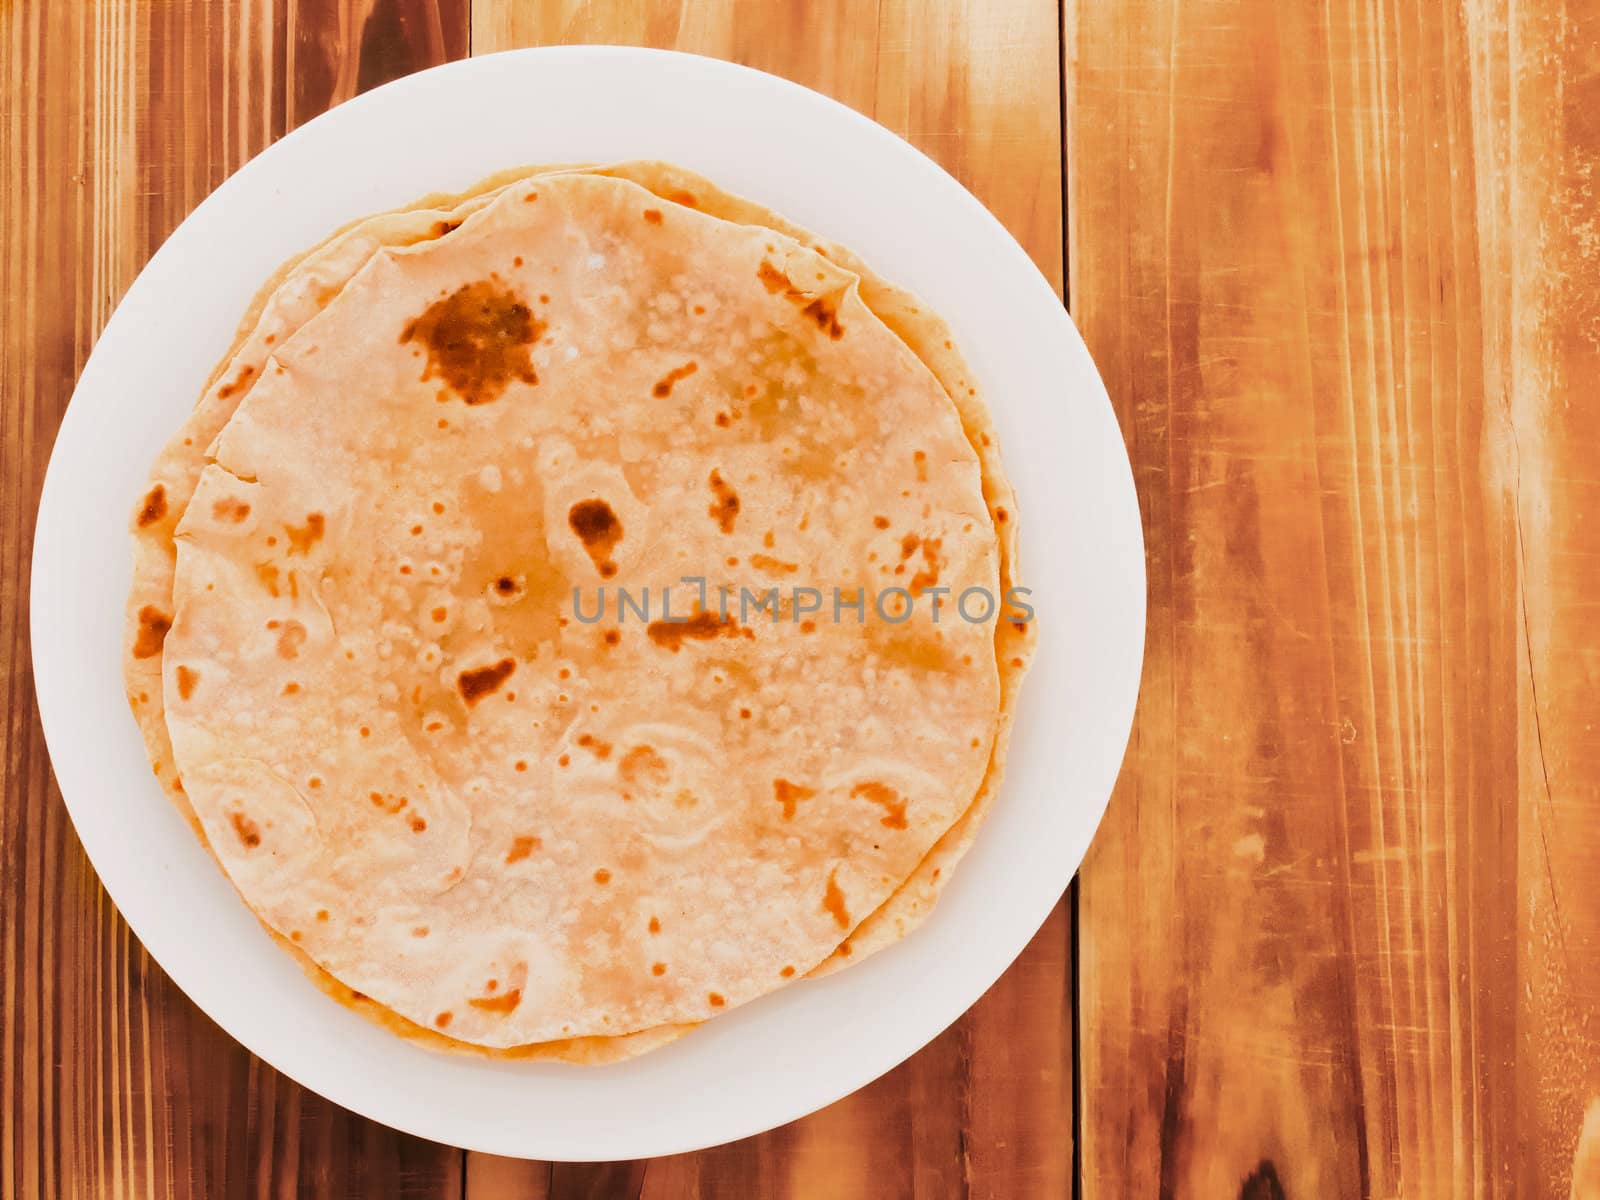 chapati by zkruger